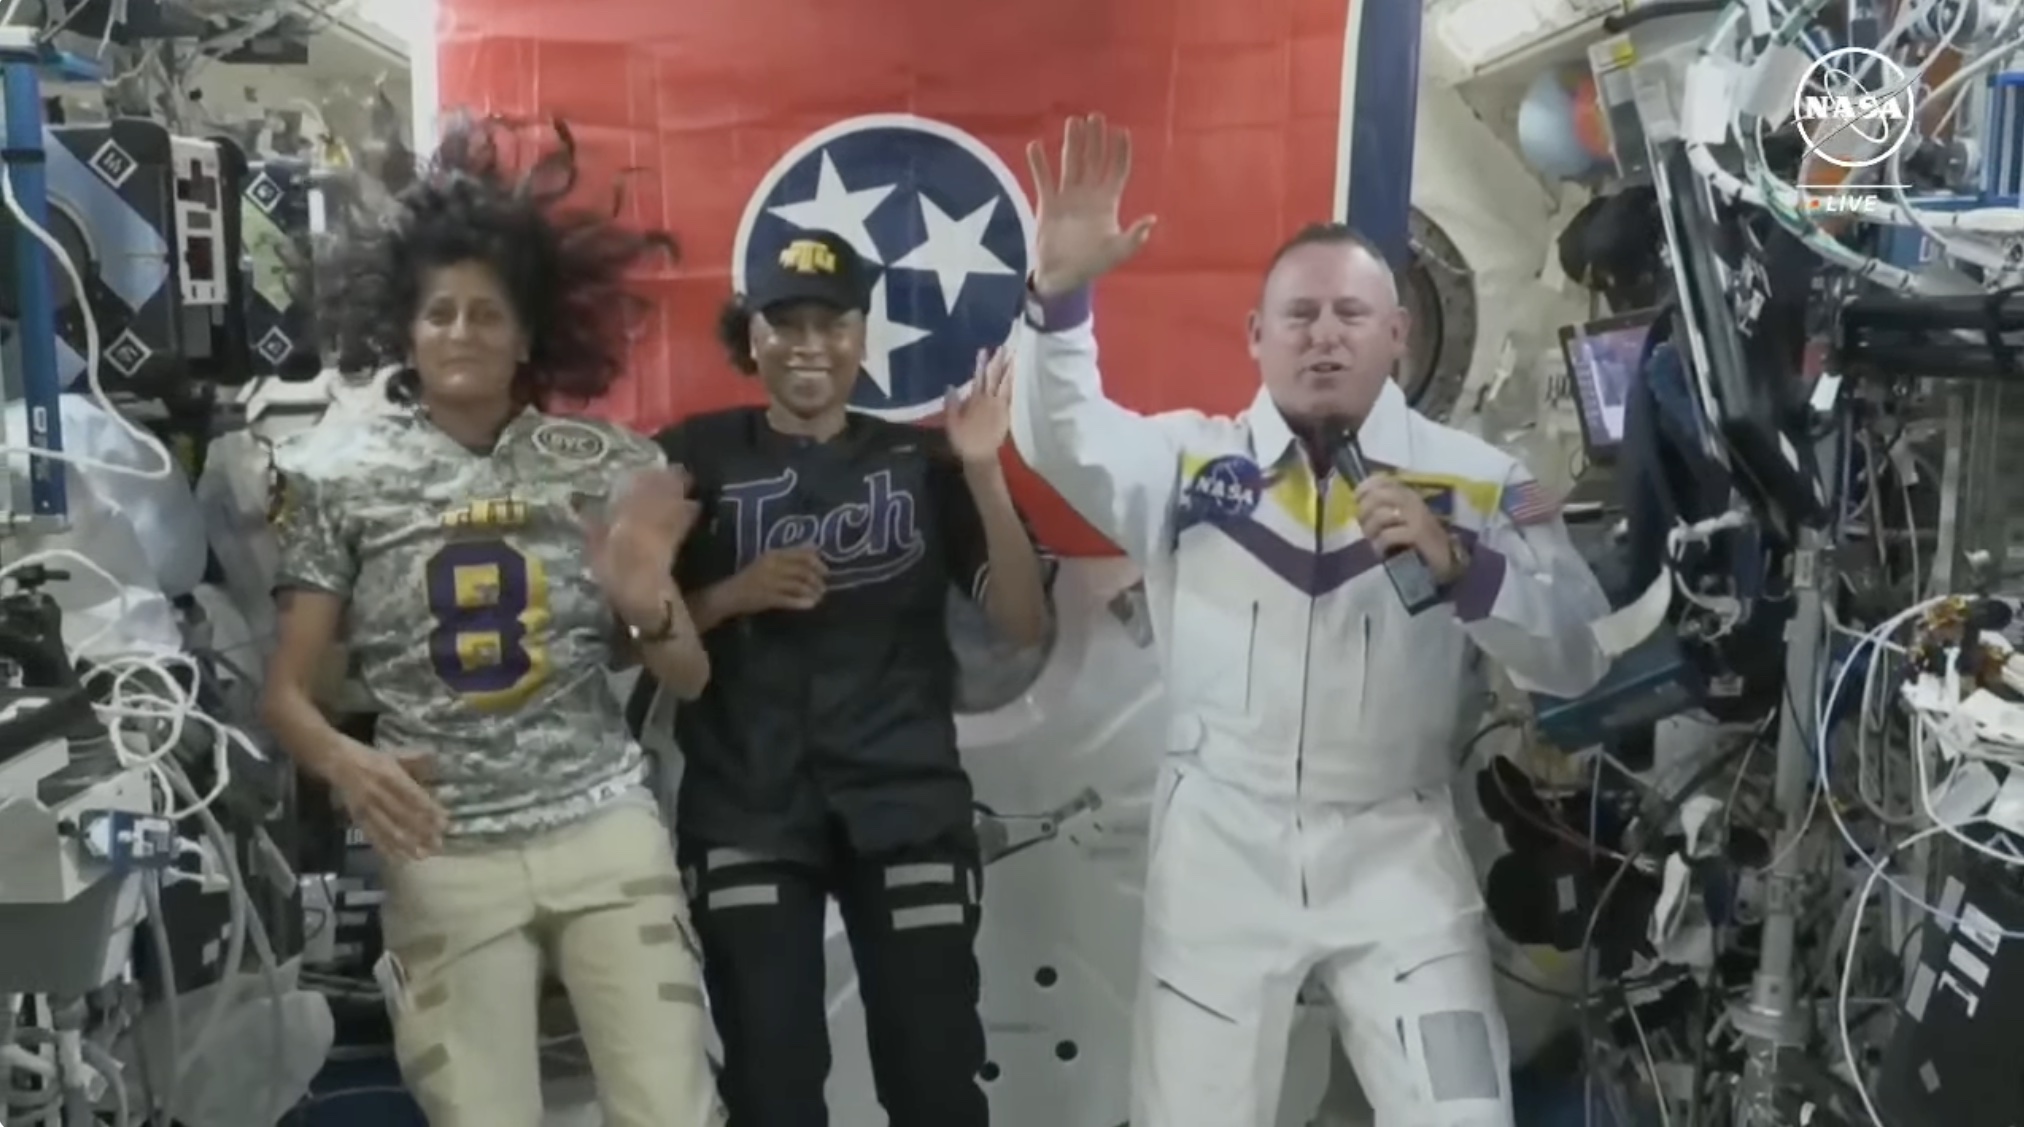 From left: Astronauts Suni Williams and Jeannette Epps join Tennessee Tech alumnus and trustee Barry “Butch” Wilmore for his June 11 video chat from the International Space Station with the children of Tech faculty and staff. Williams wears a Tech football jersey while Epps appears in a Tech baseball uniform. Photo: Screengrab of live event via NASA TV.